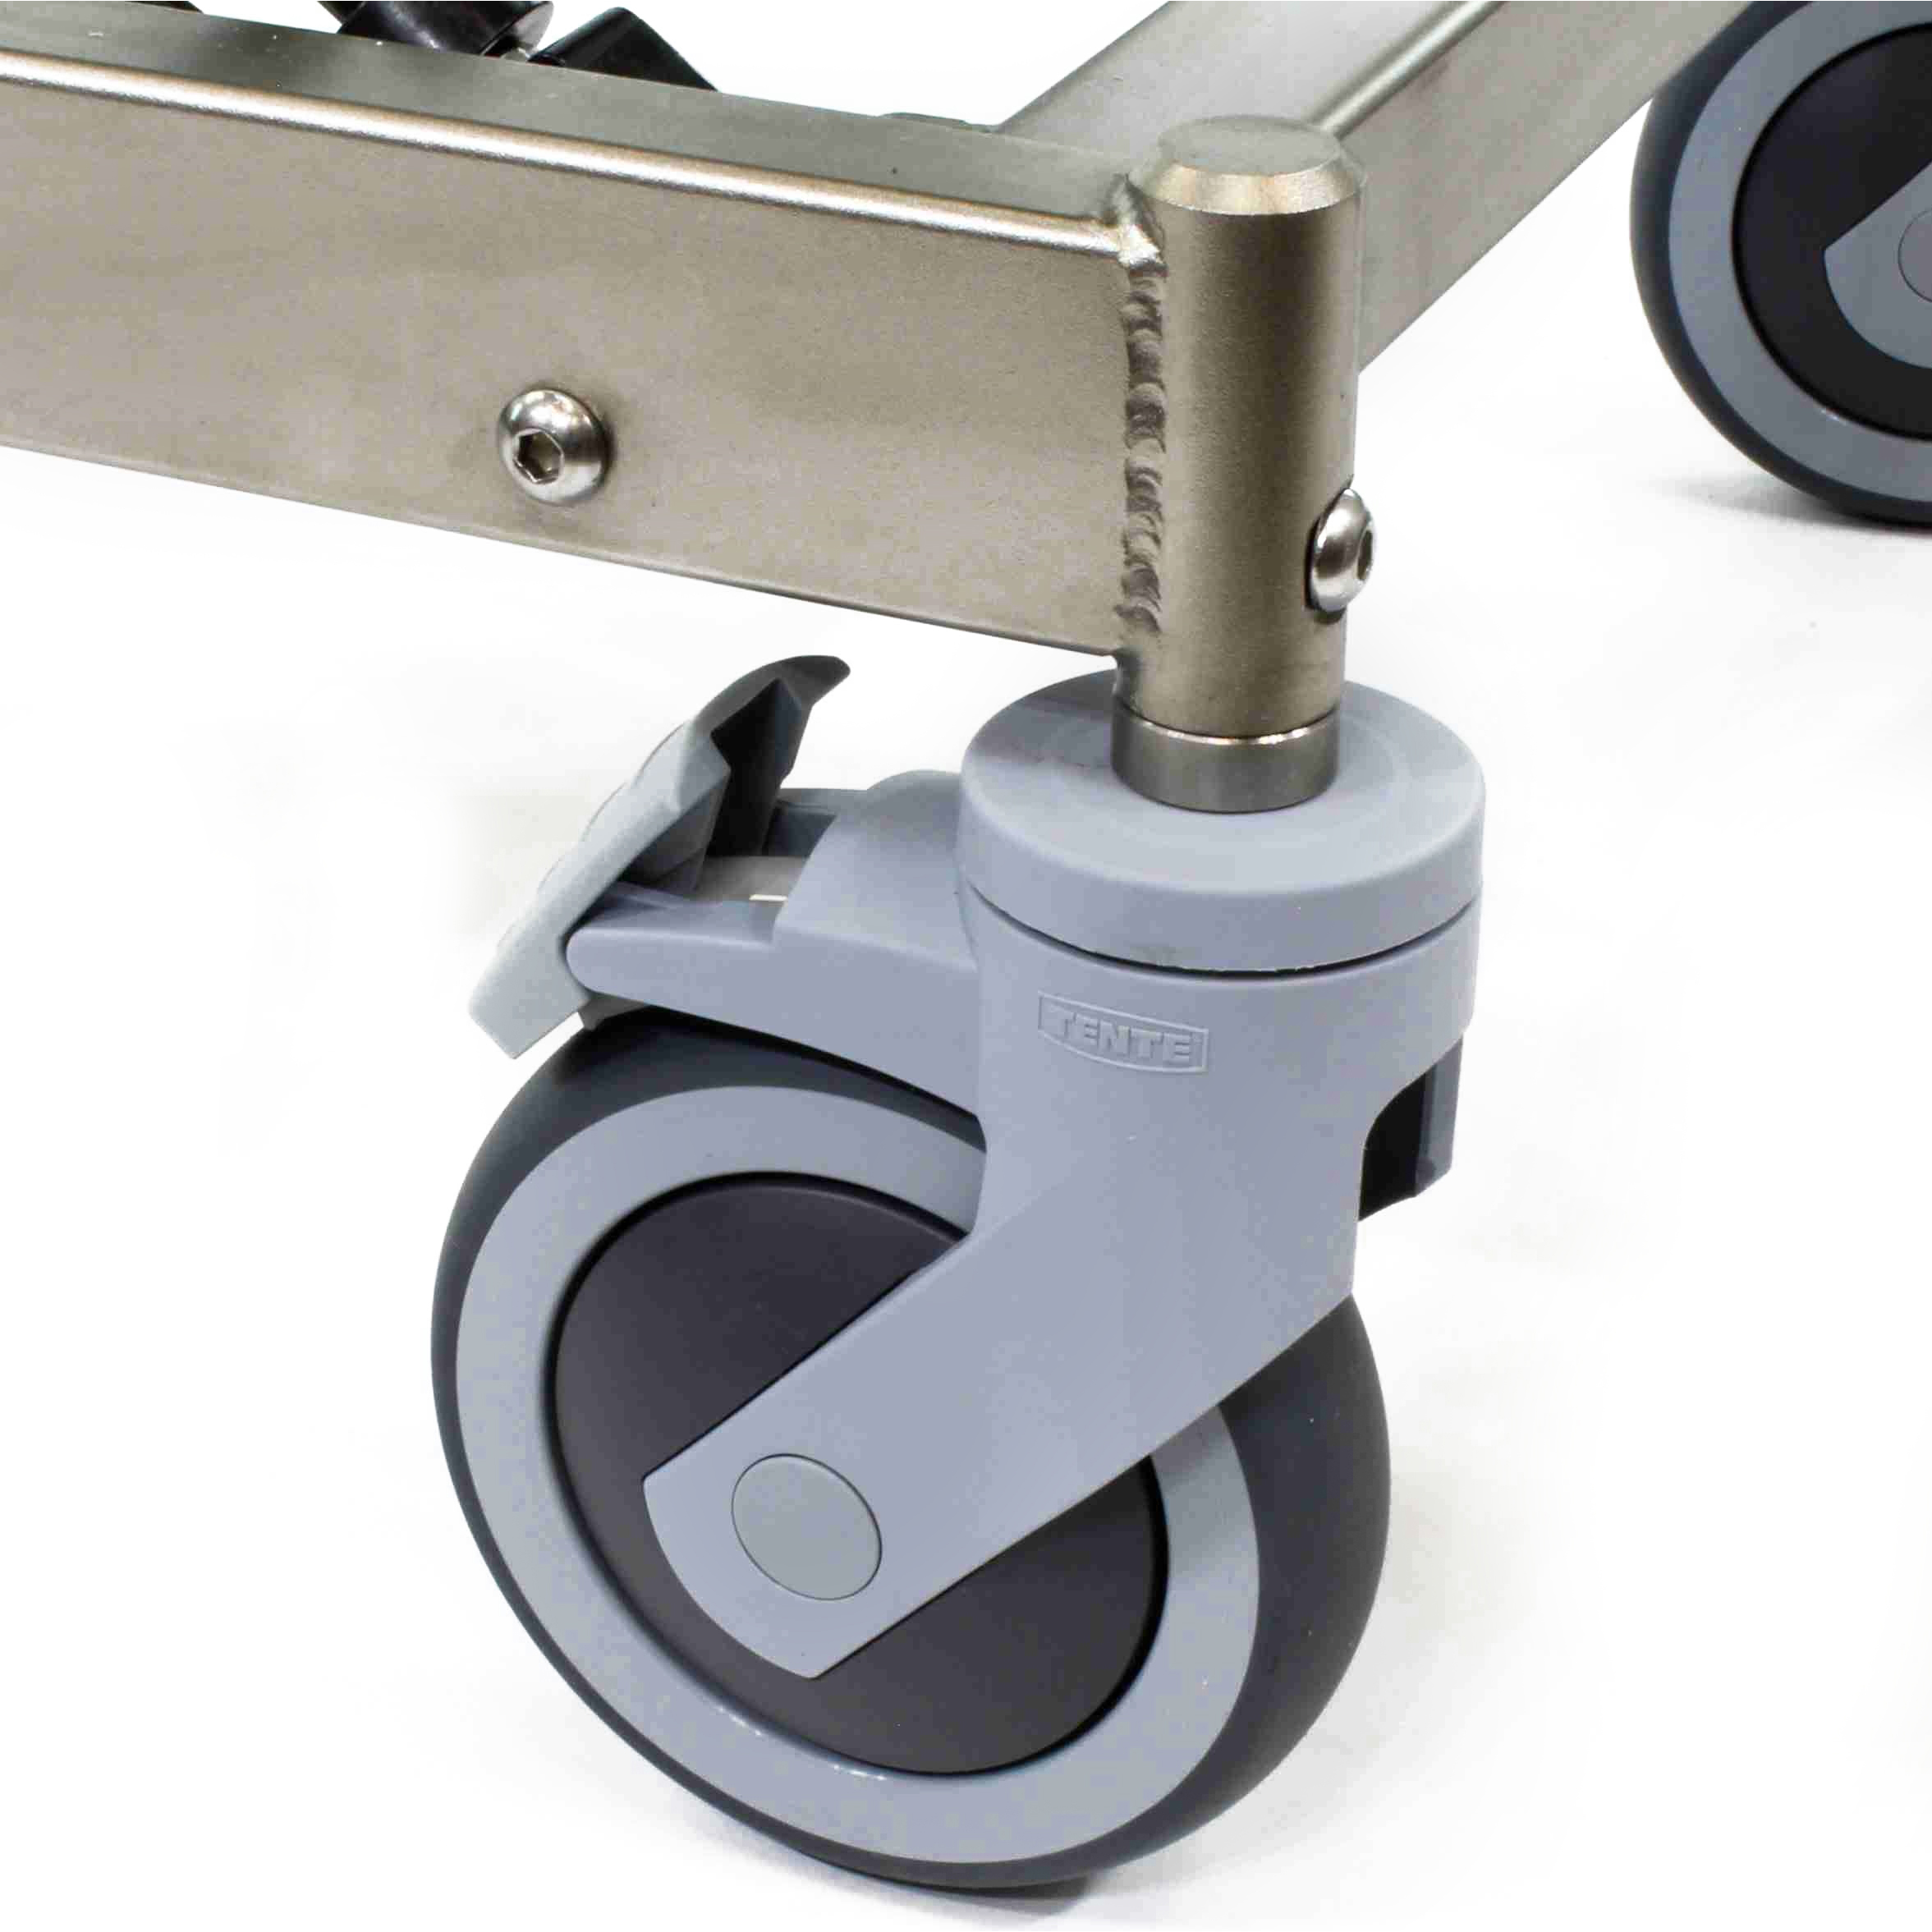 5" Casters (Standard) (ZCUT5)